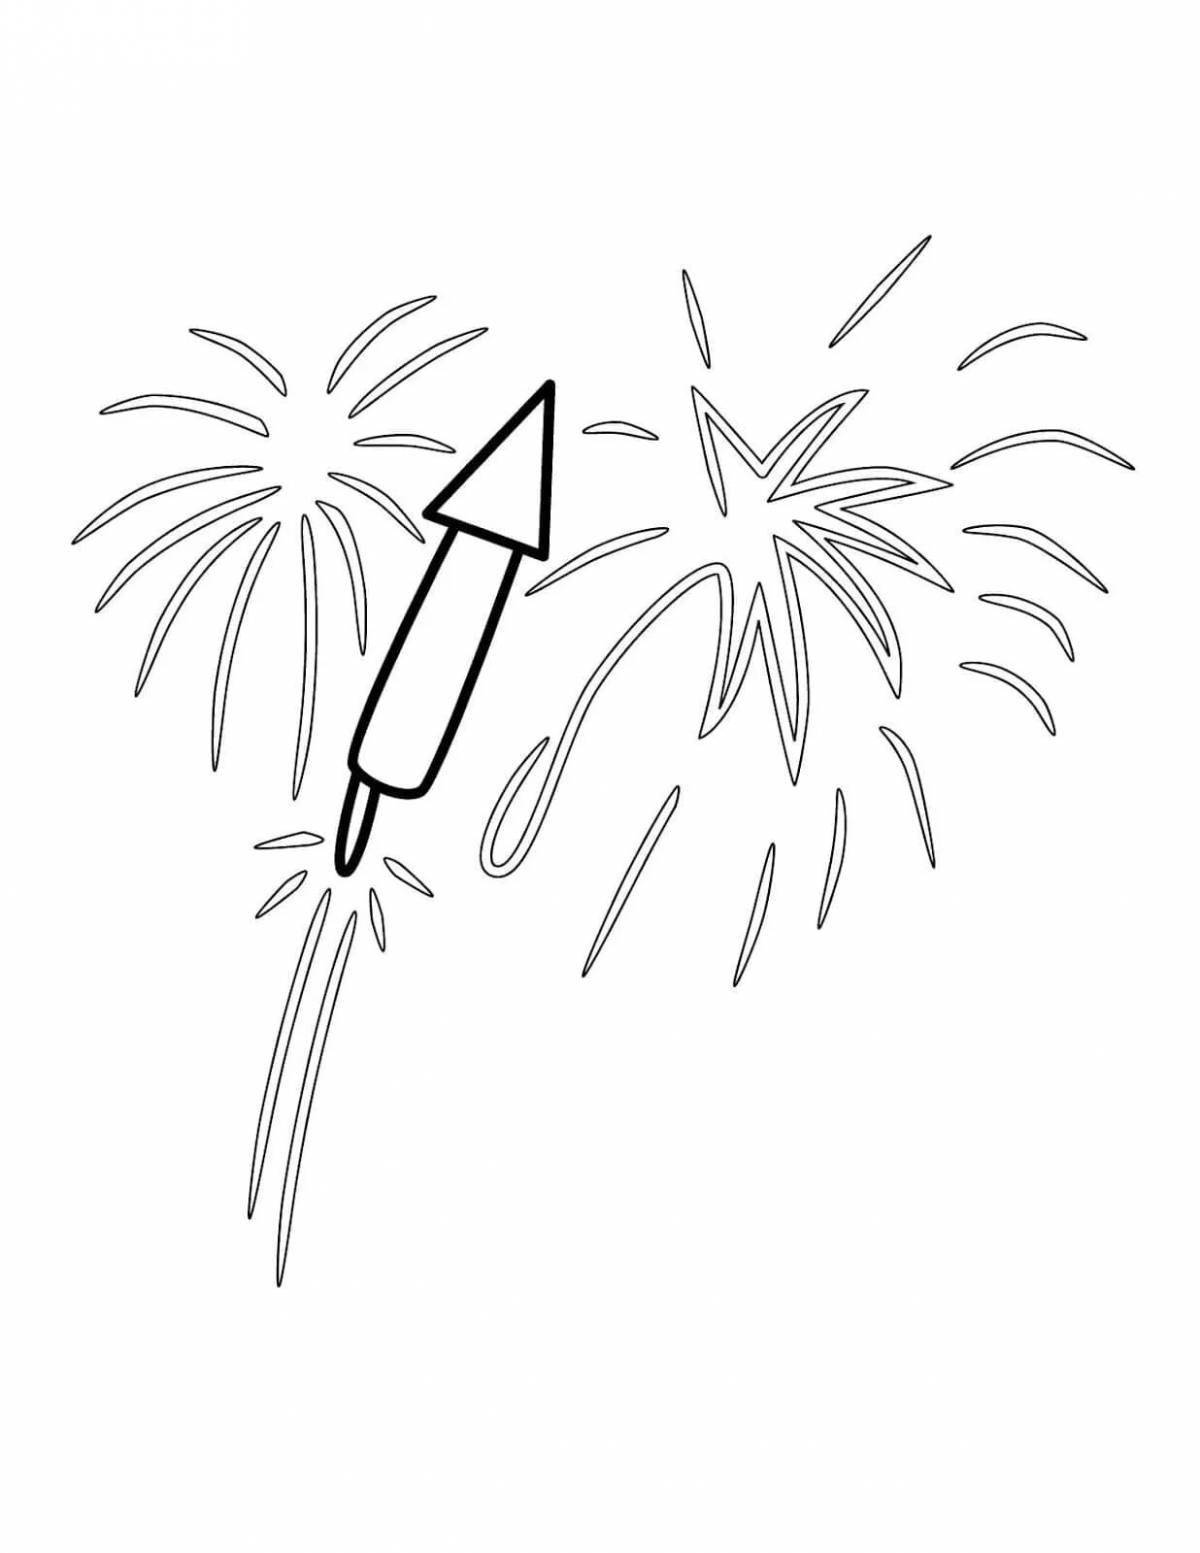 Vivid bow sparklers coloring page